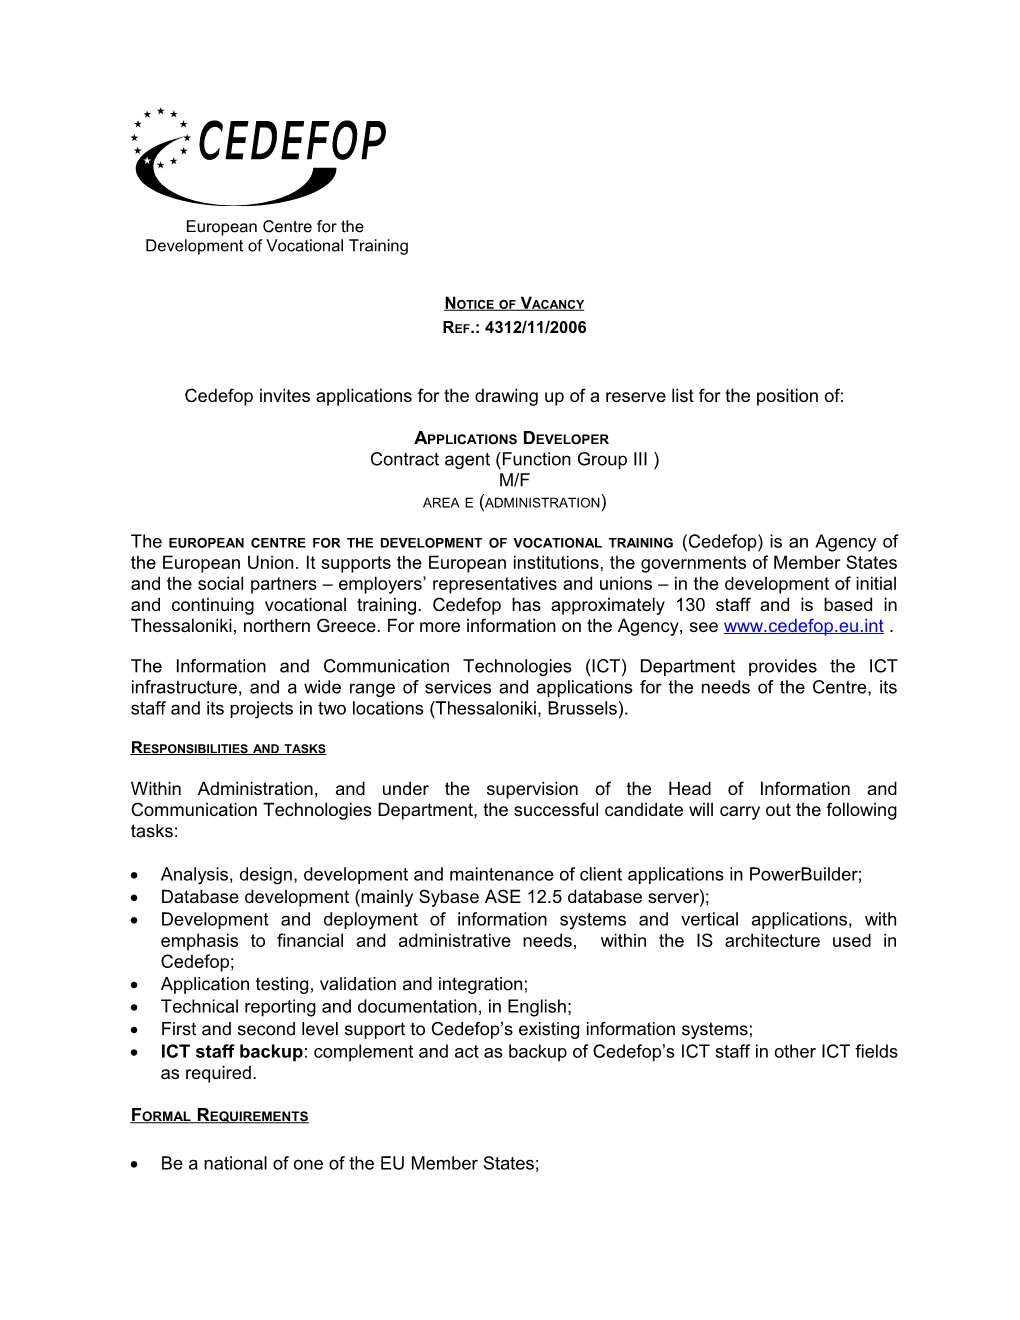 Cedefop Invites Applications for the Drawing up of a Reserve List for the Position Of